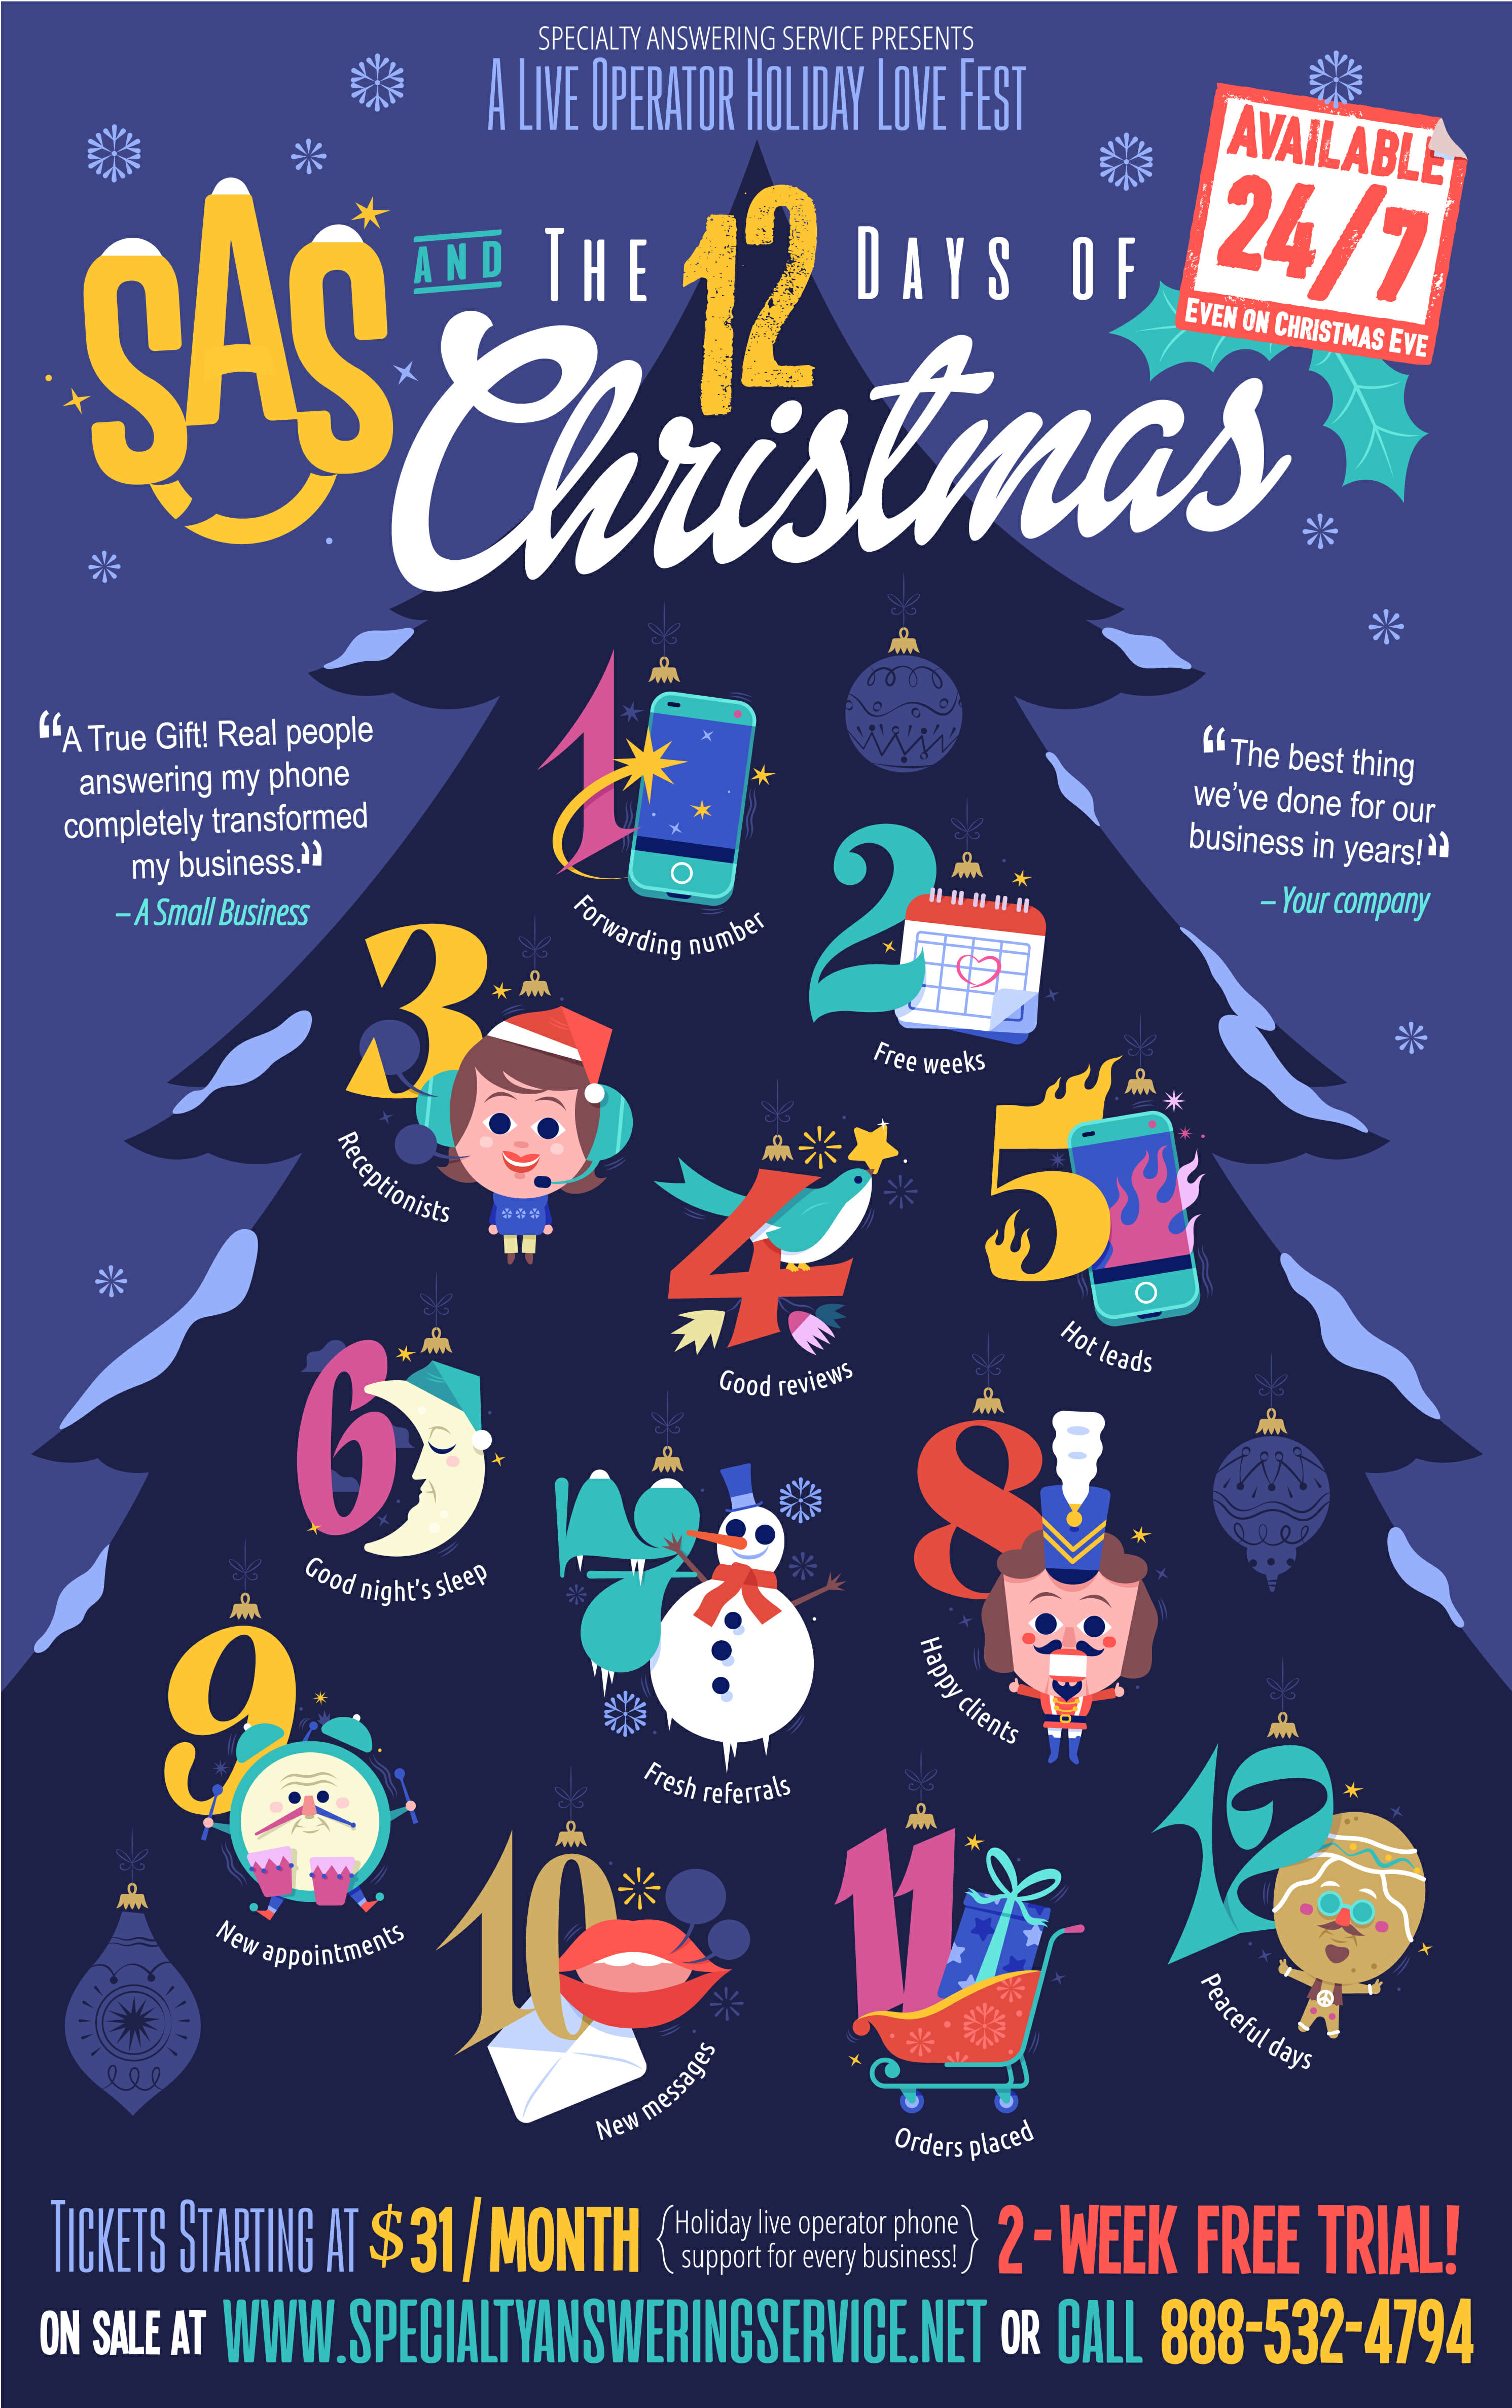 The 12 Days of Answering Service Christmas